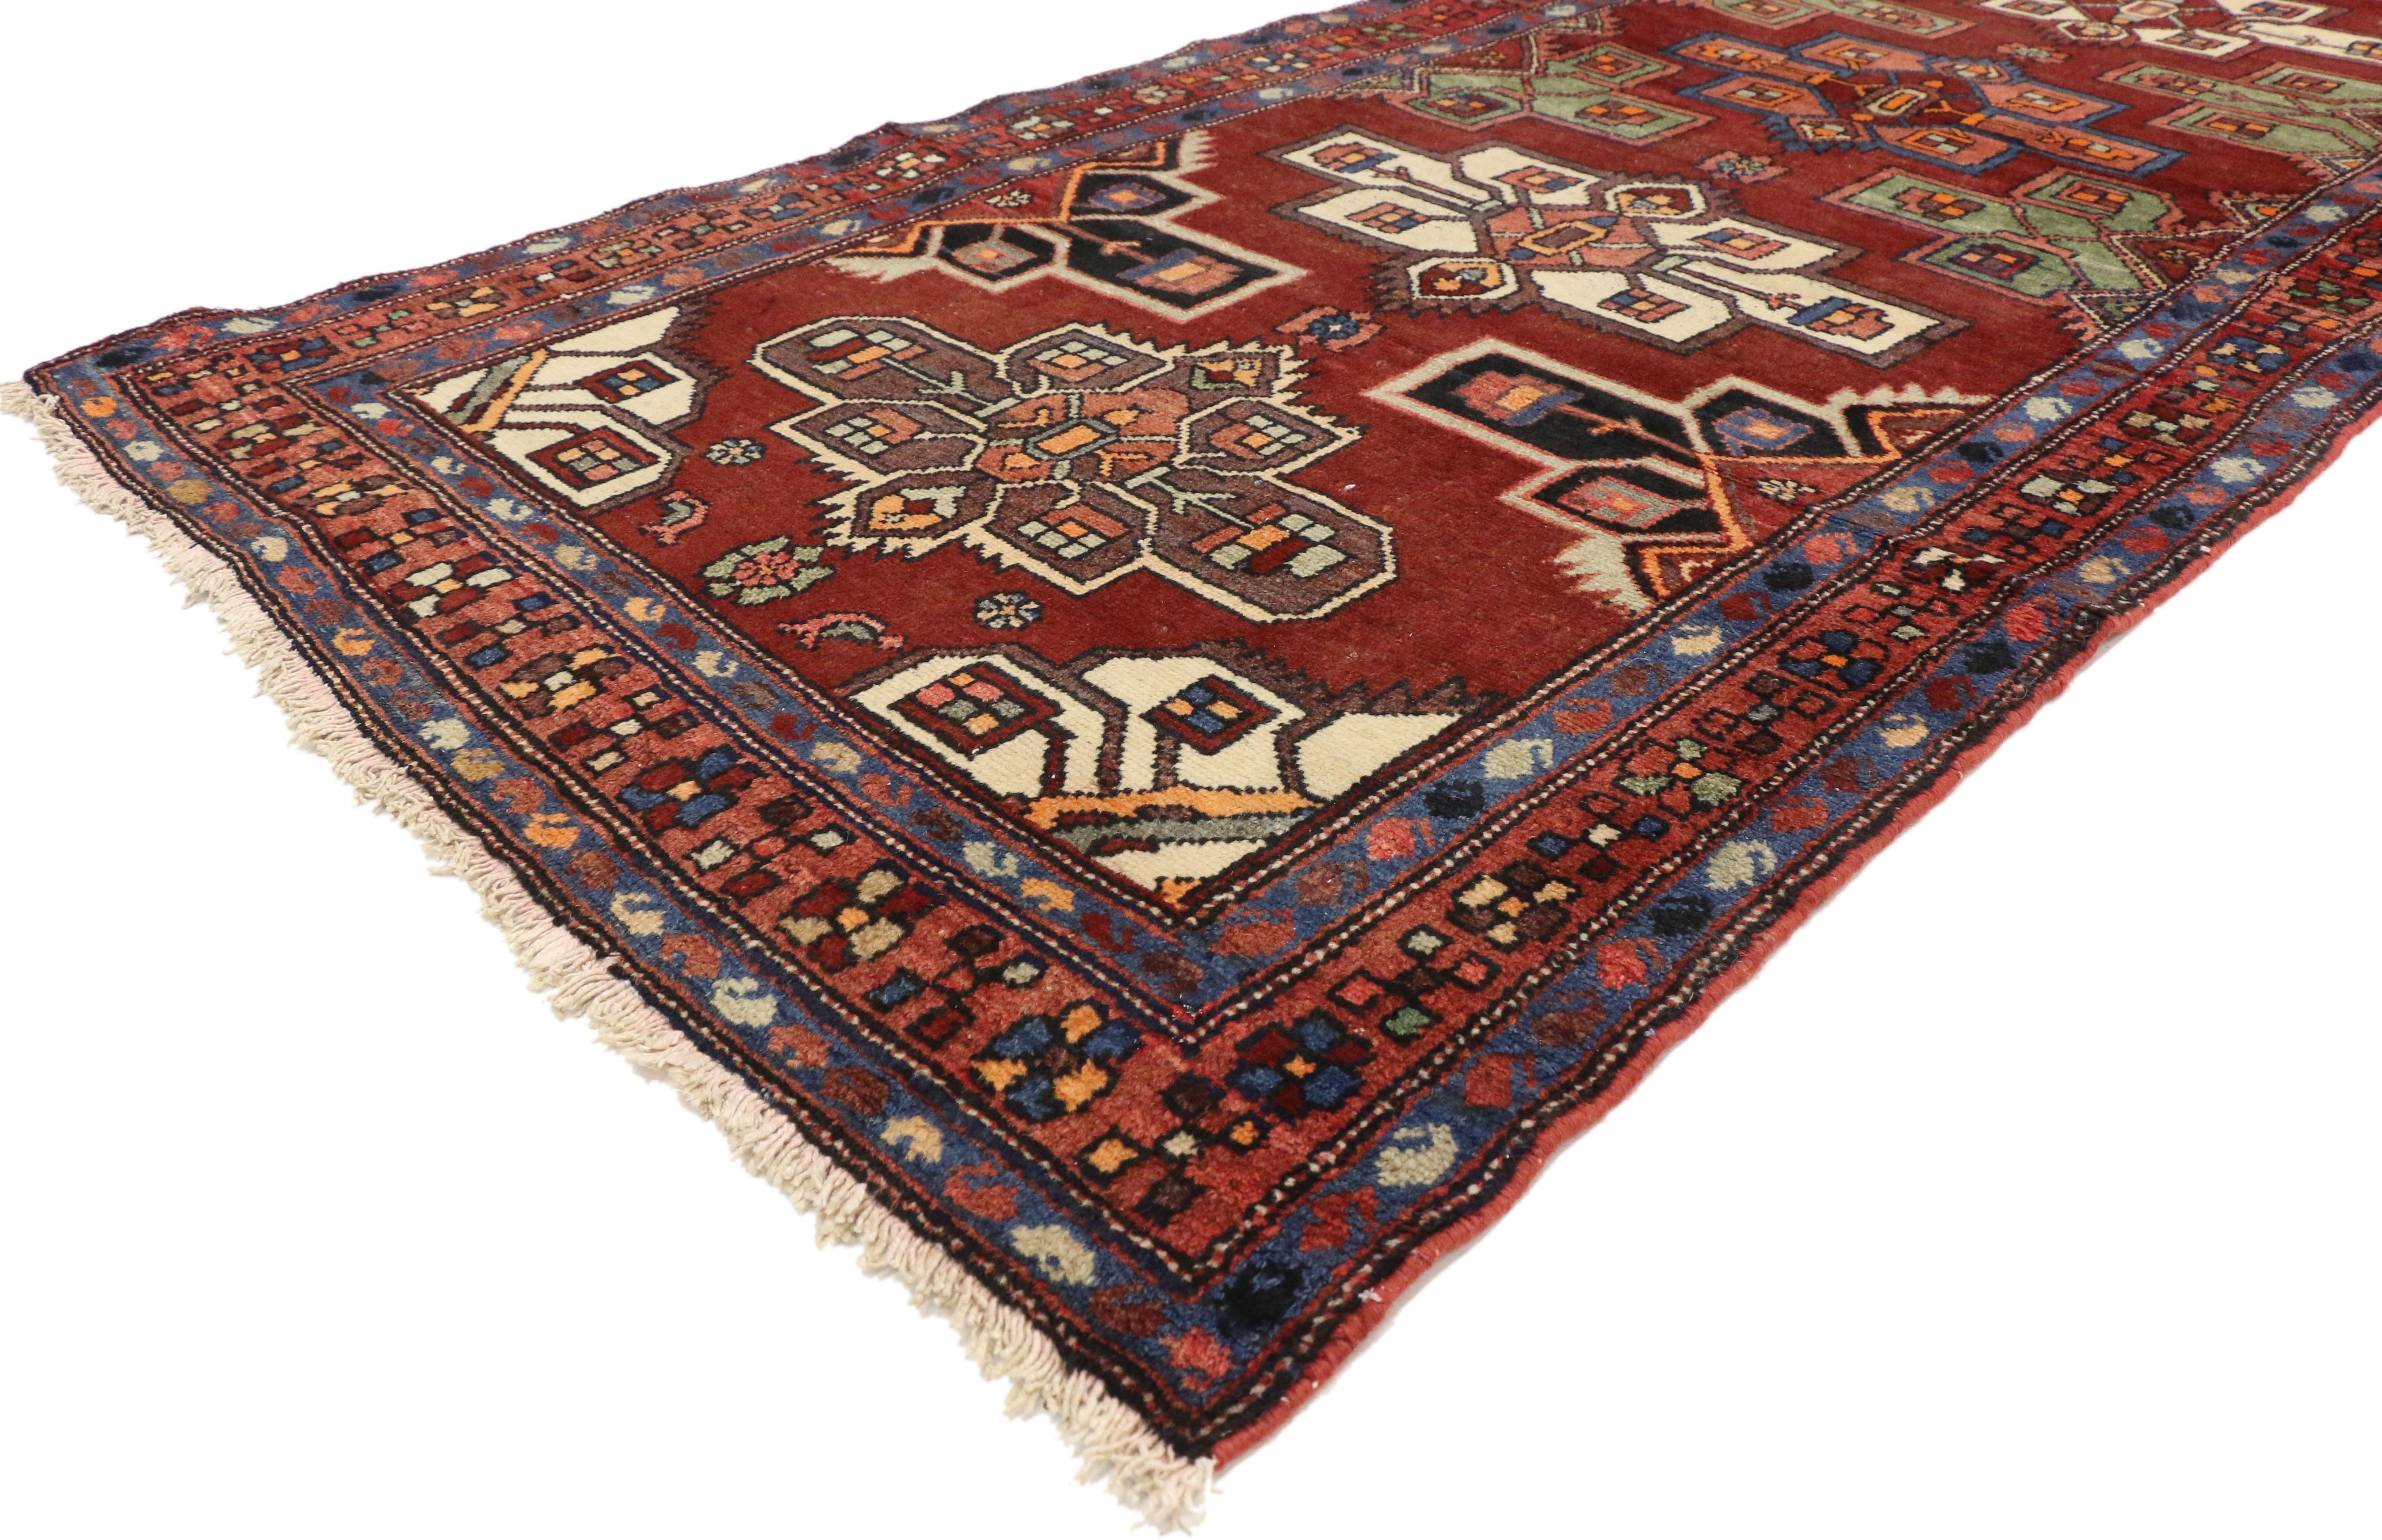 76358, Vintage Persian Heriz Runner, Mid-Century Modern hallway runner. This hand knotted wool vintage Persian Heriz runner features five stepped amulet medallions with stepped ziggurats reaching towards the centre floating in an abrashed red field.